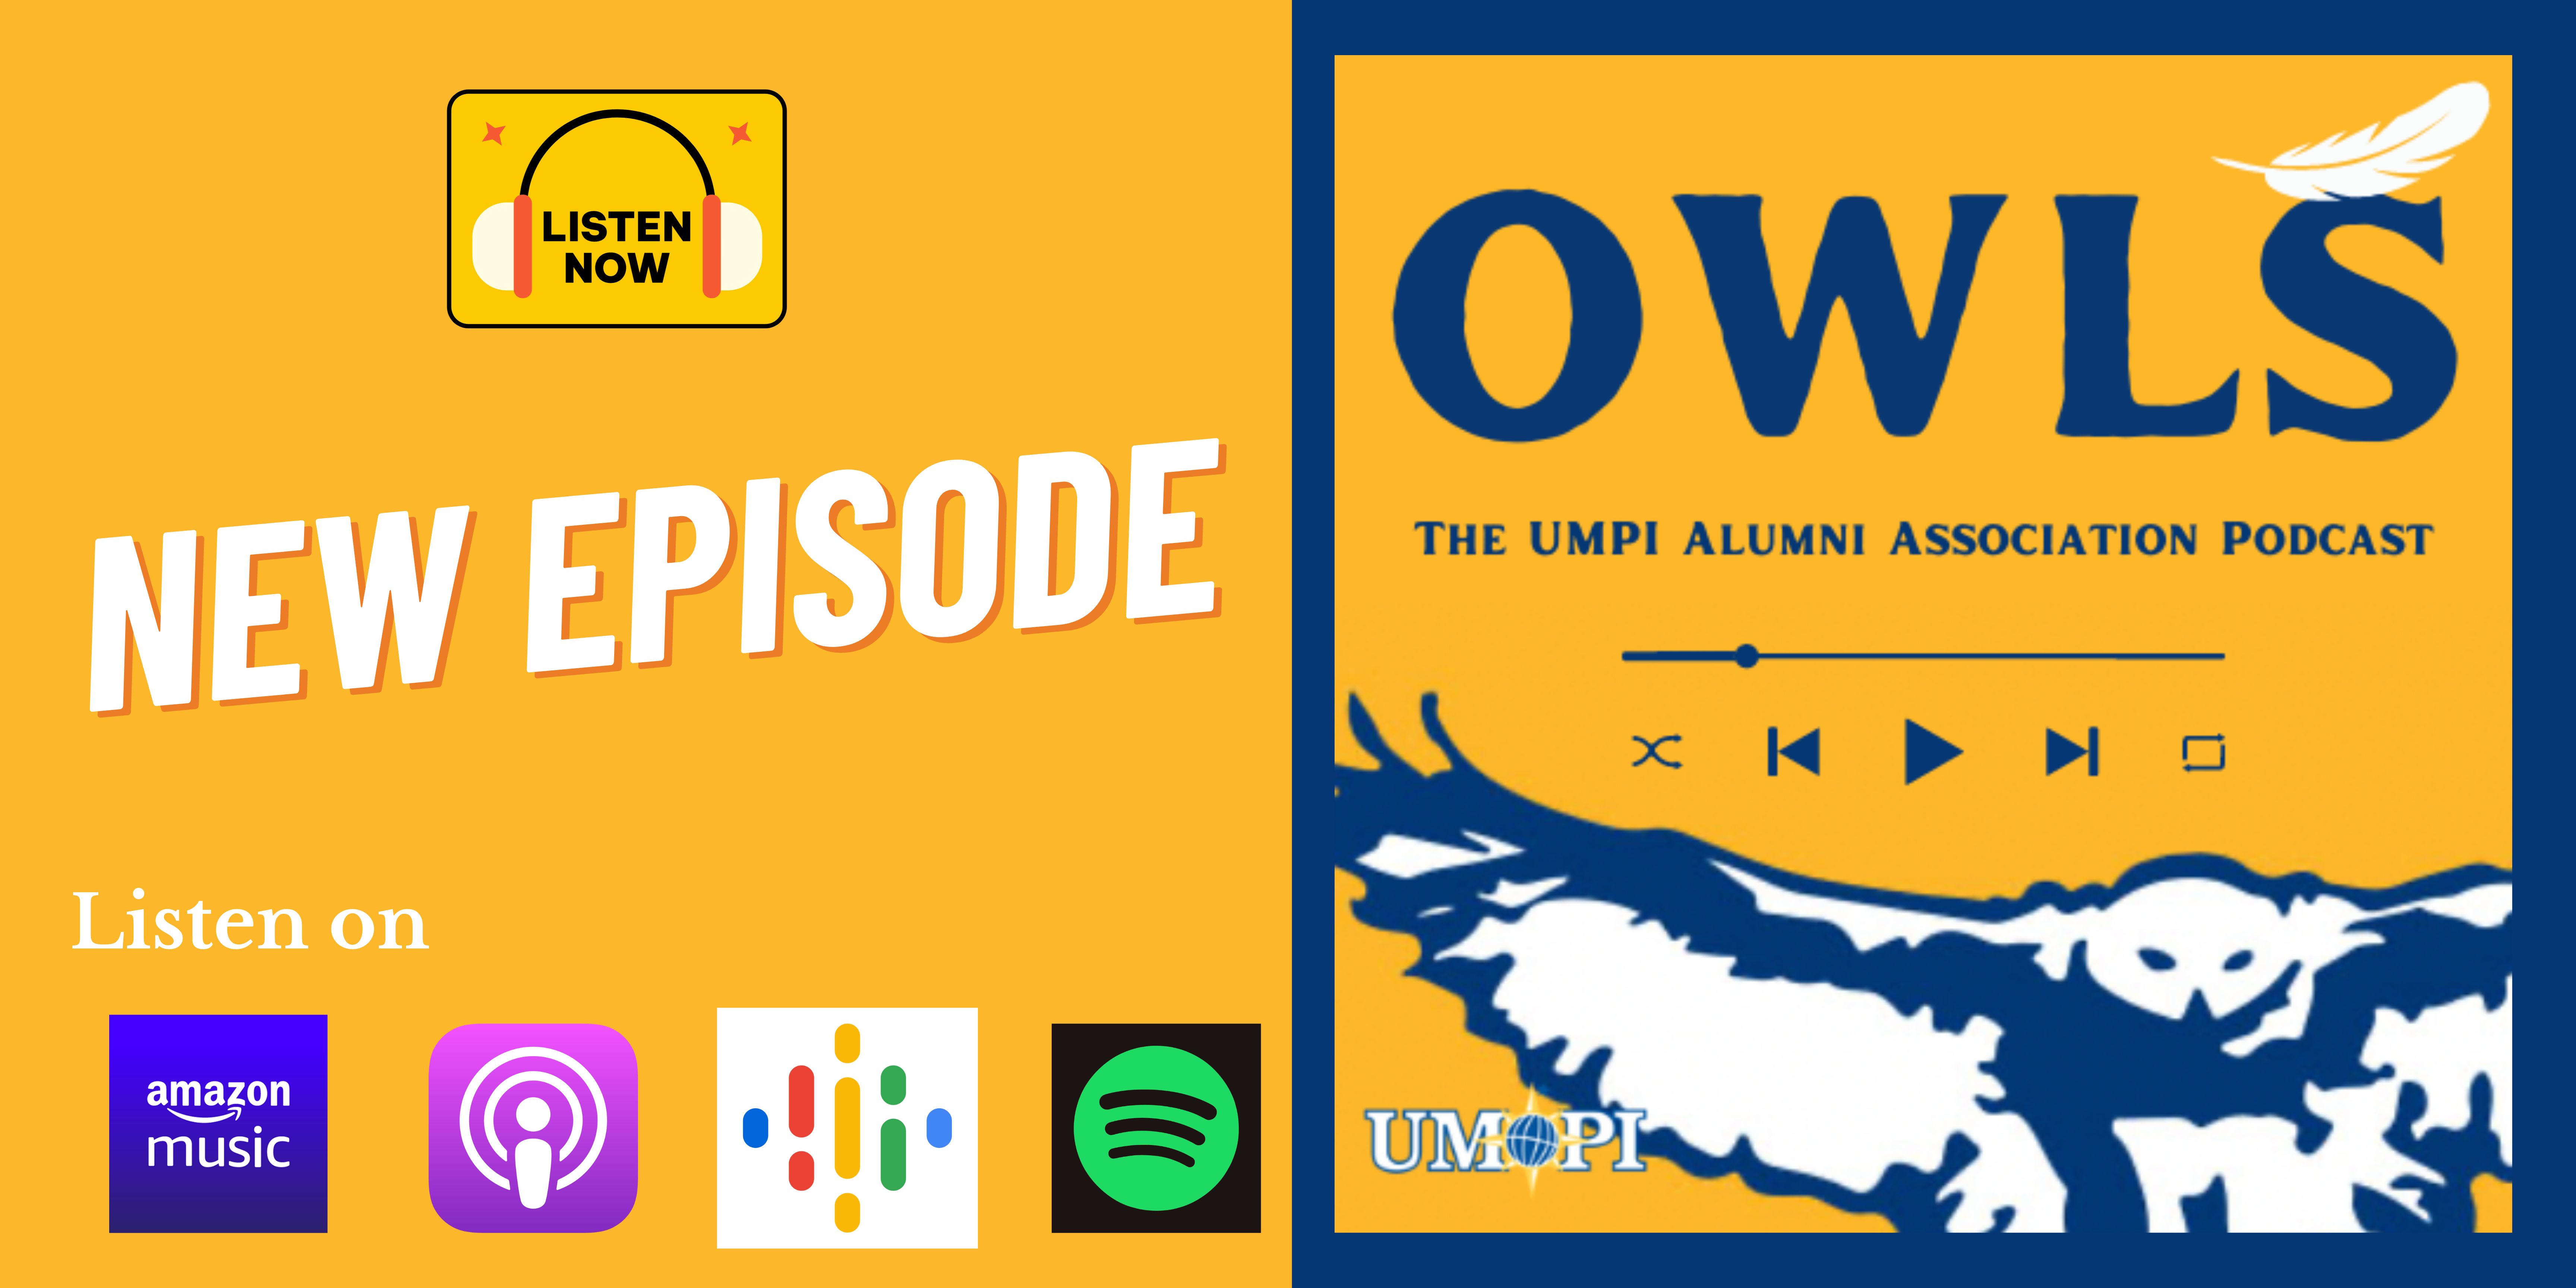 OWLS Podcast